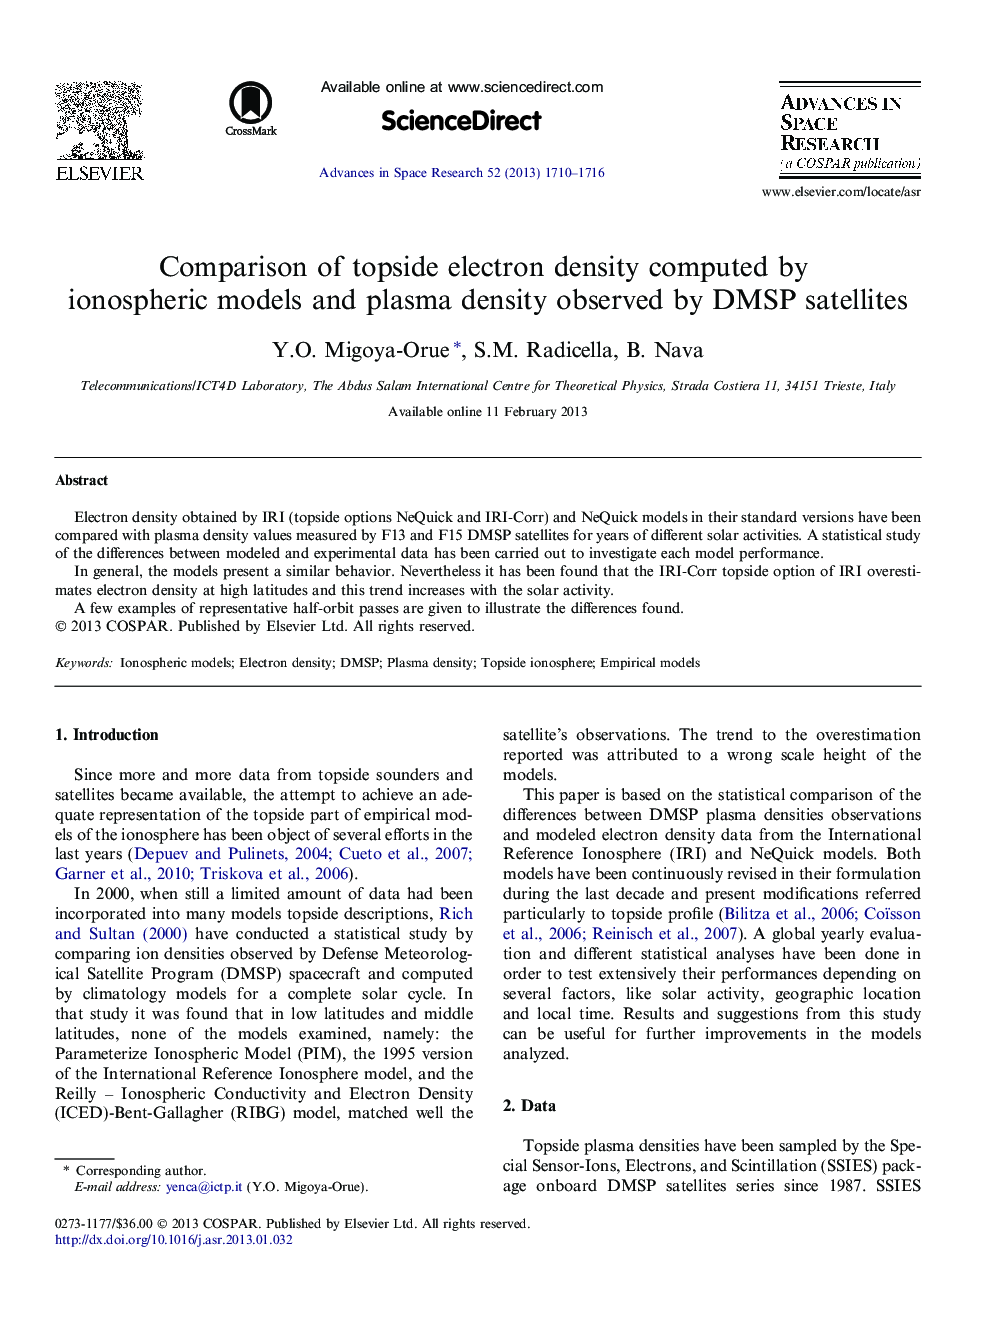 Comparison of topside electron density computed by ionospheric models and plasma density observed by DMSP satellites